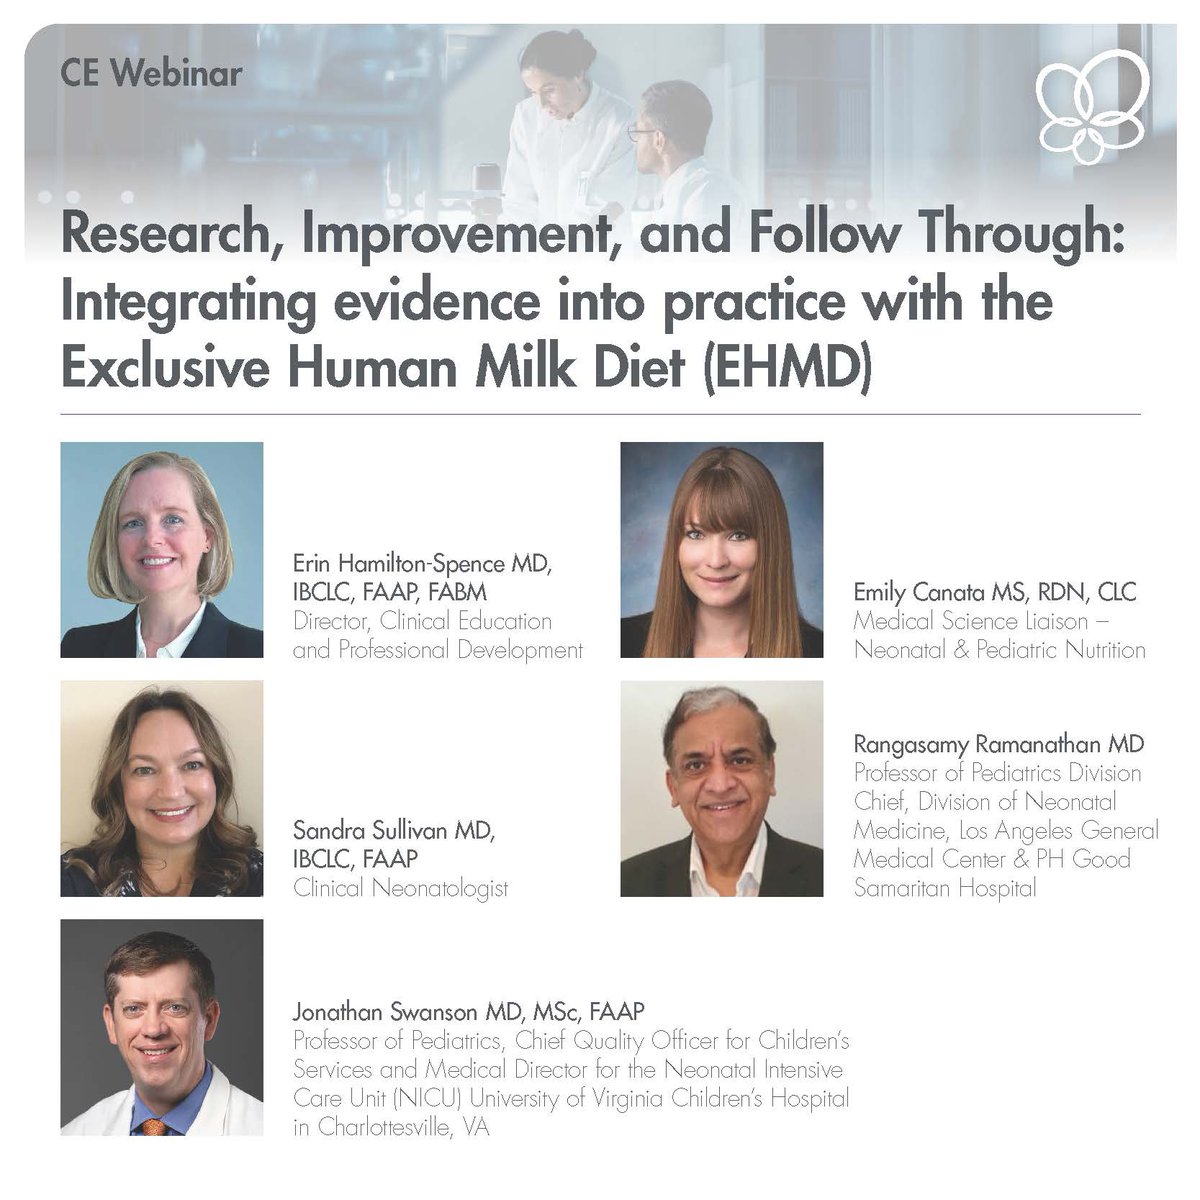 #ICYMI You can still sign up to watch the on-demand CE Webinar: Research, Improvement, and Follow Through:  Integrating Evidence into Practice with the Exclusive Human Milk Diet (#EHMD).

Register now: hubs.li/Q02shwSv0